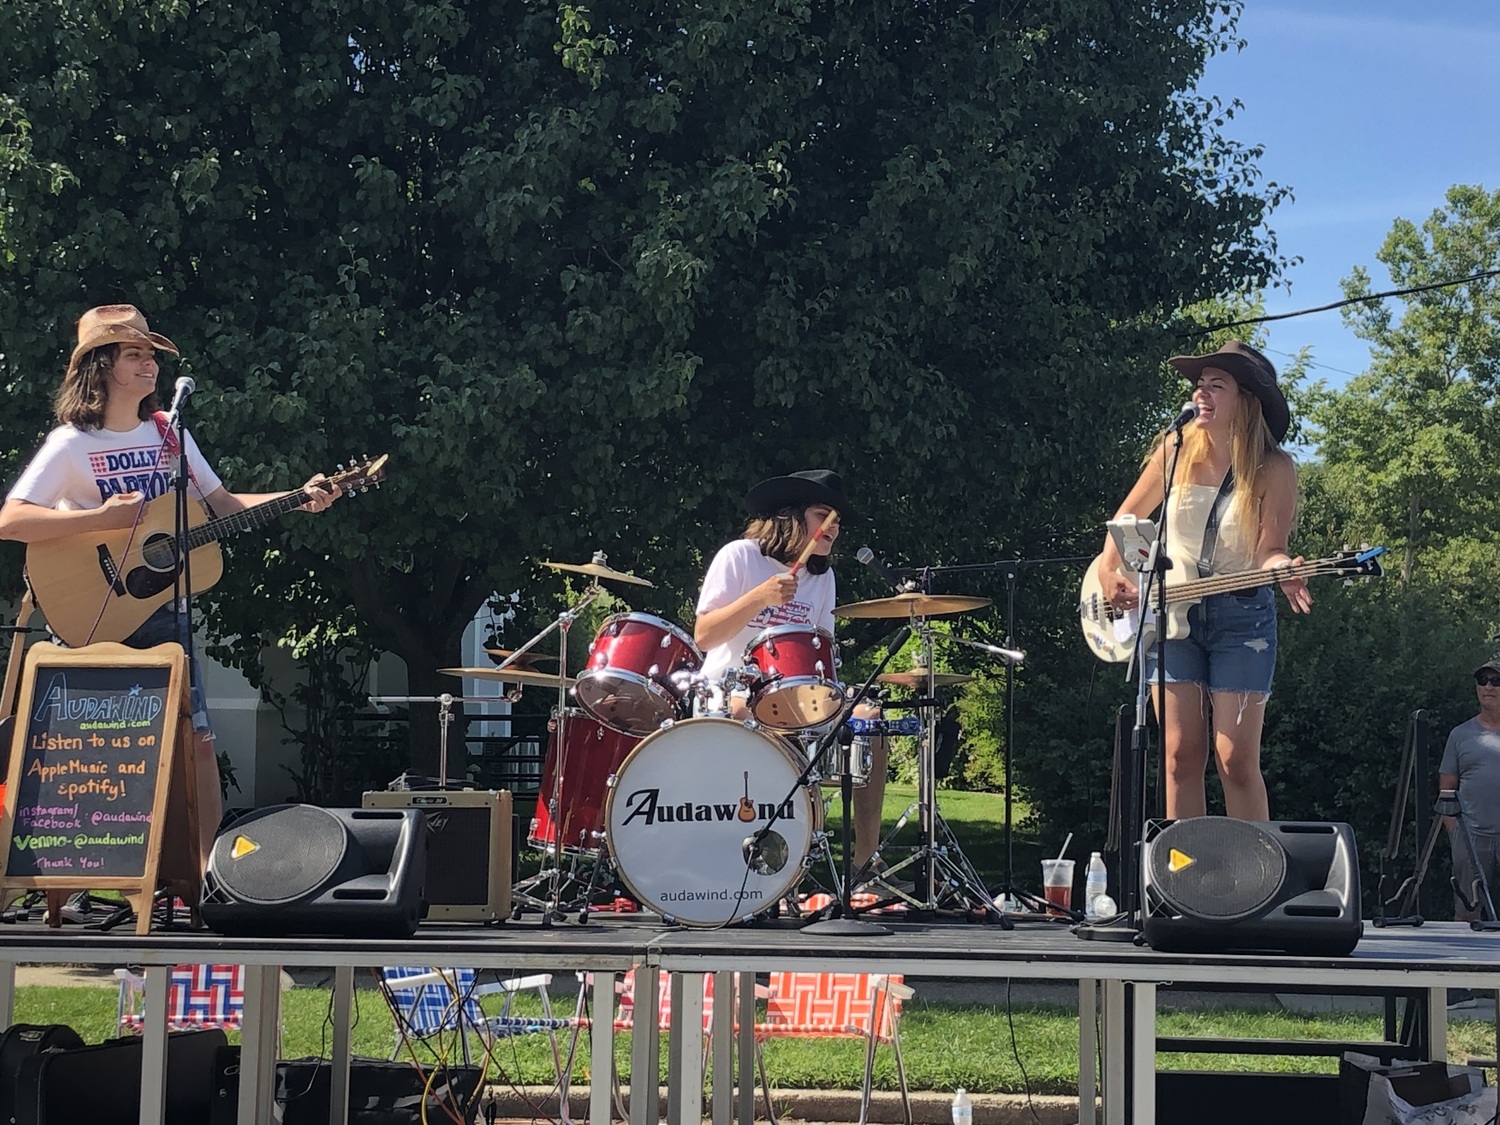 Local sibling country trio Audawind playing at the Mattituck Street Fair.